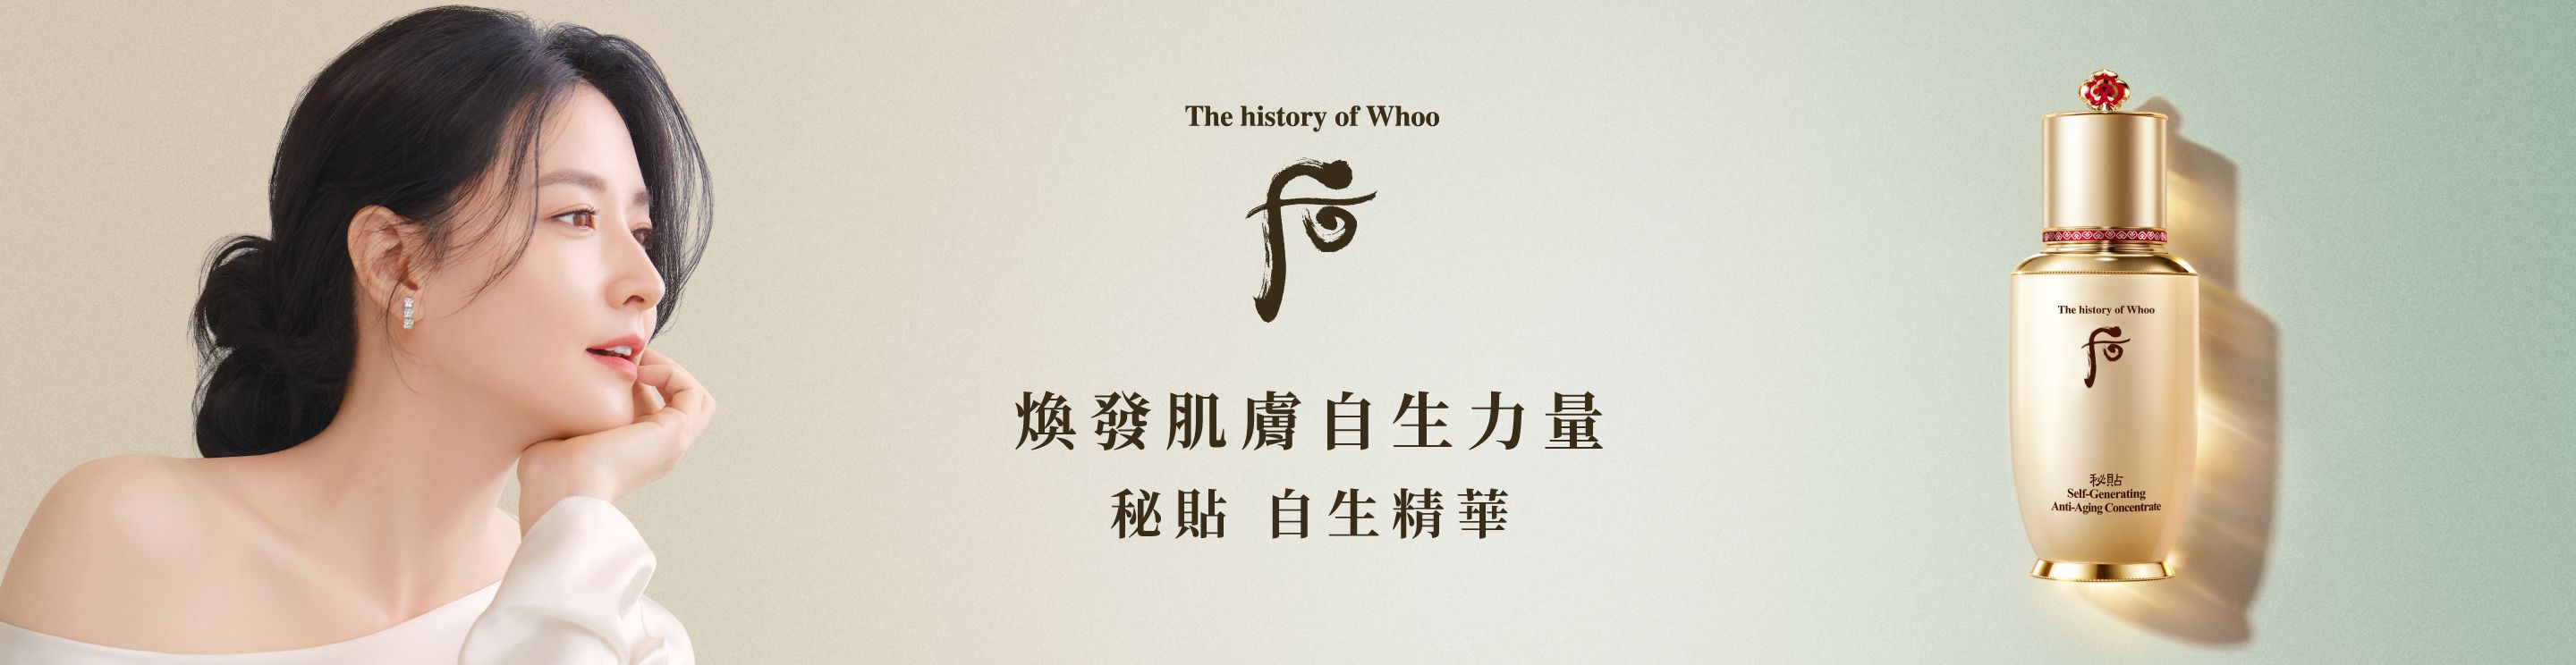 THE HISTORY OF WHOO